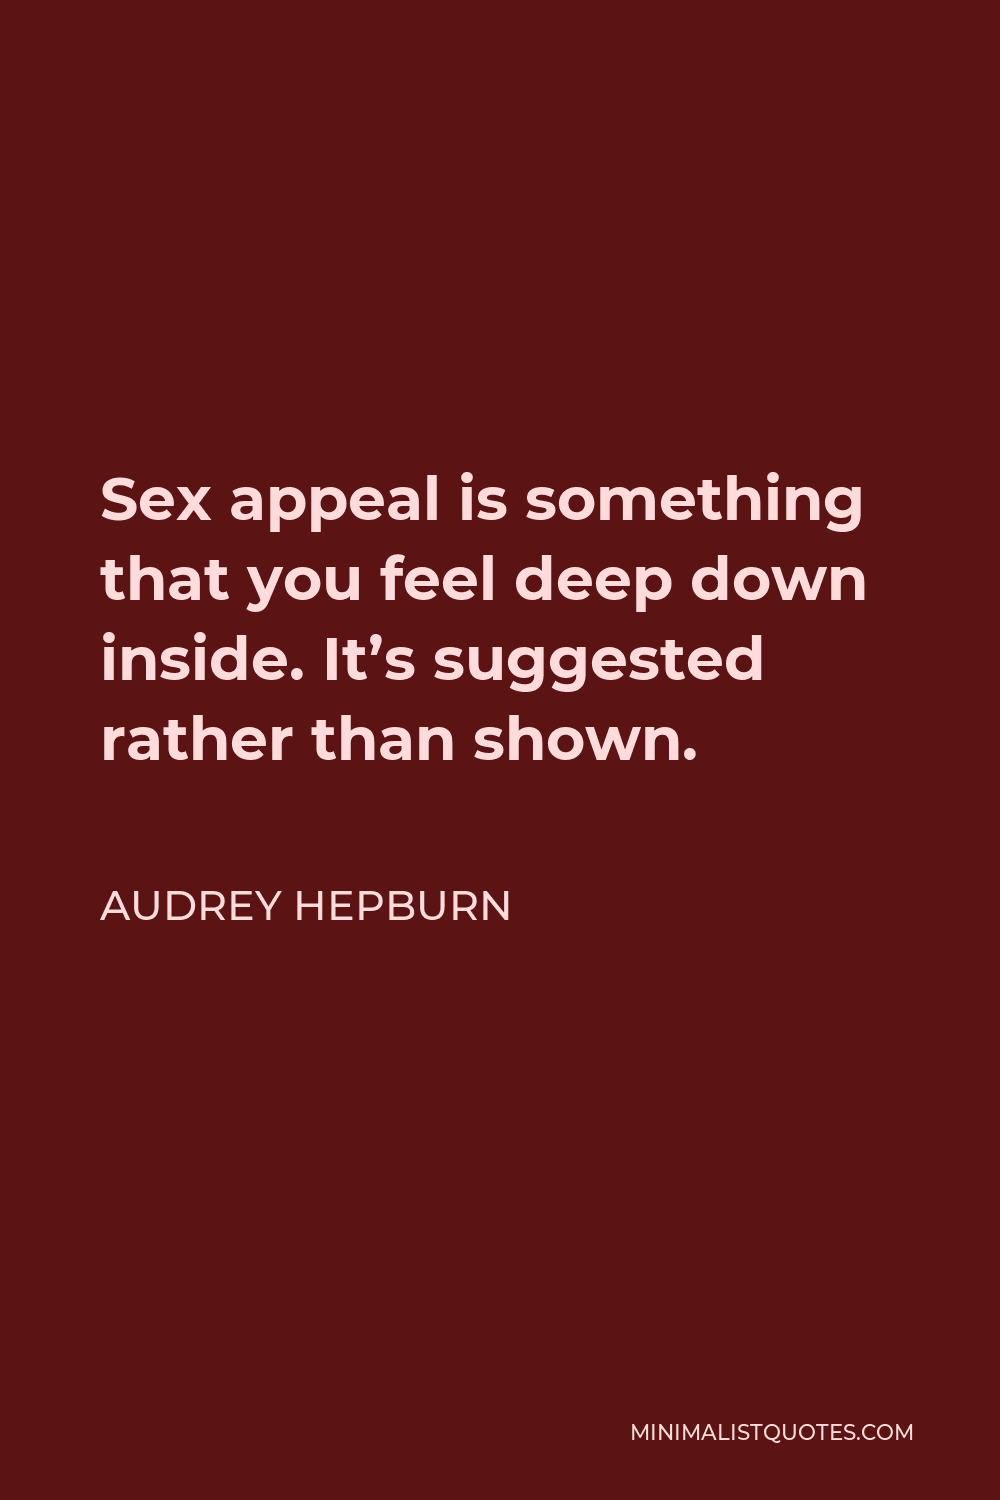 Audrey Hepburn Quote - Sex appeal is something that you feel deep down inside. It’s suggested rather than shown.